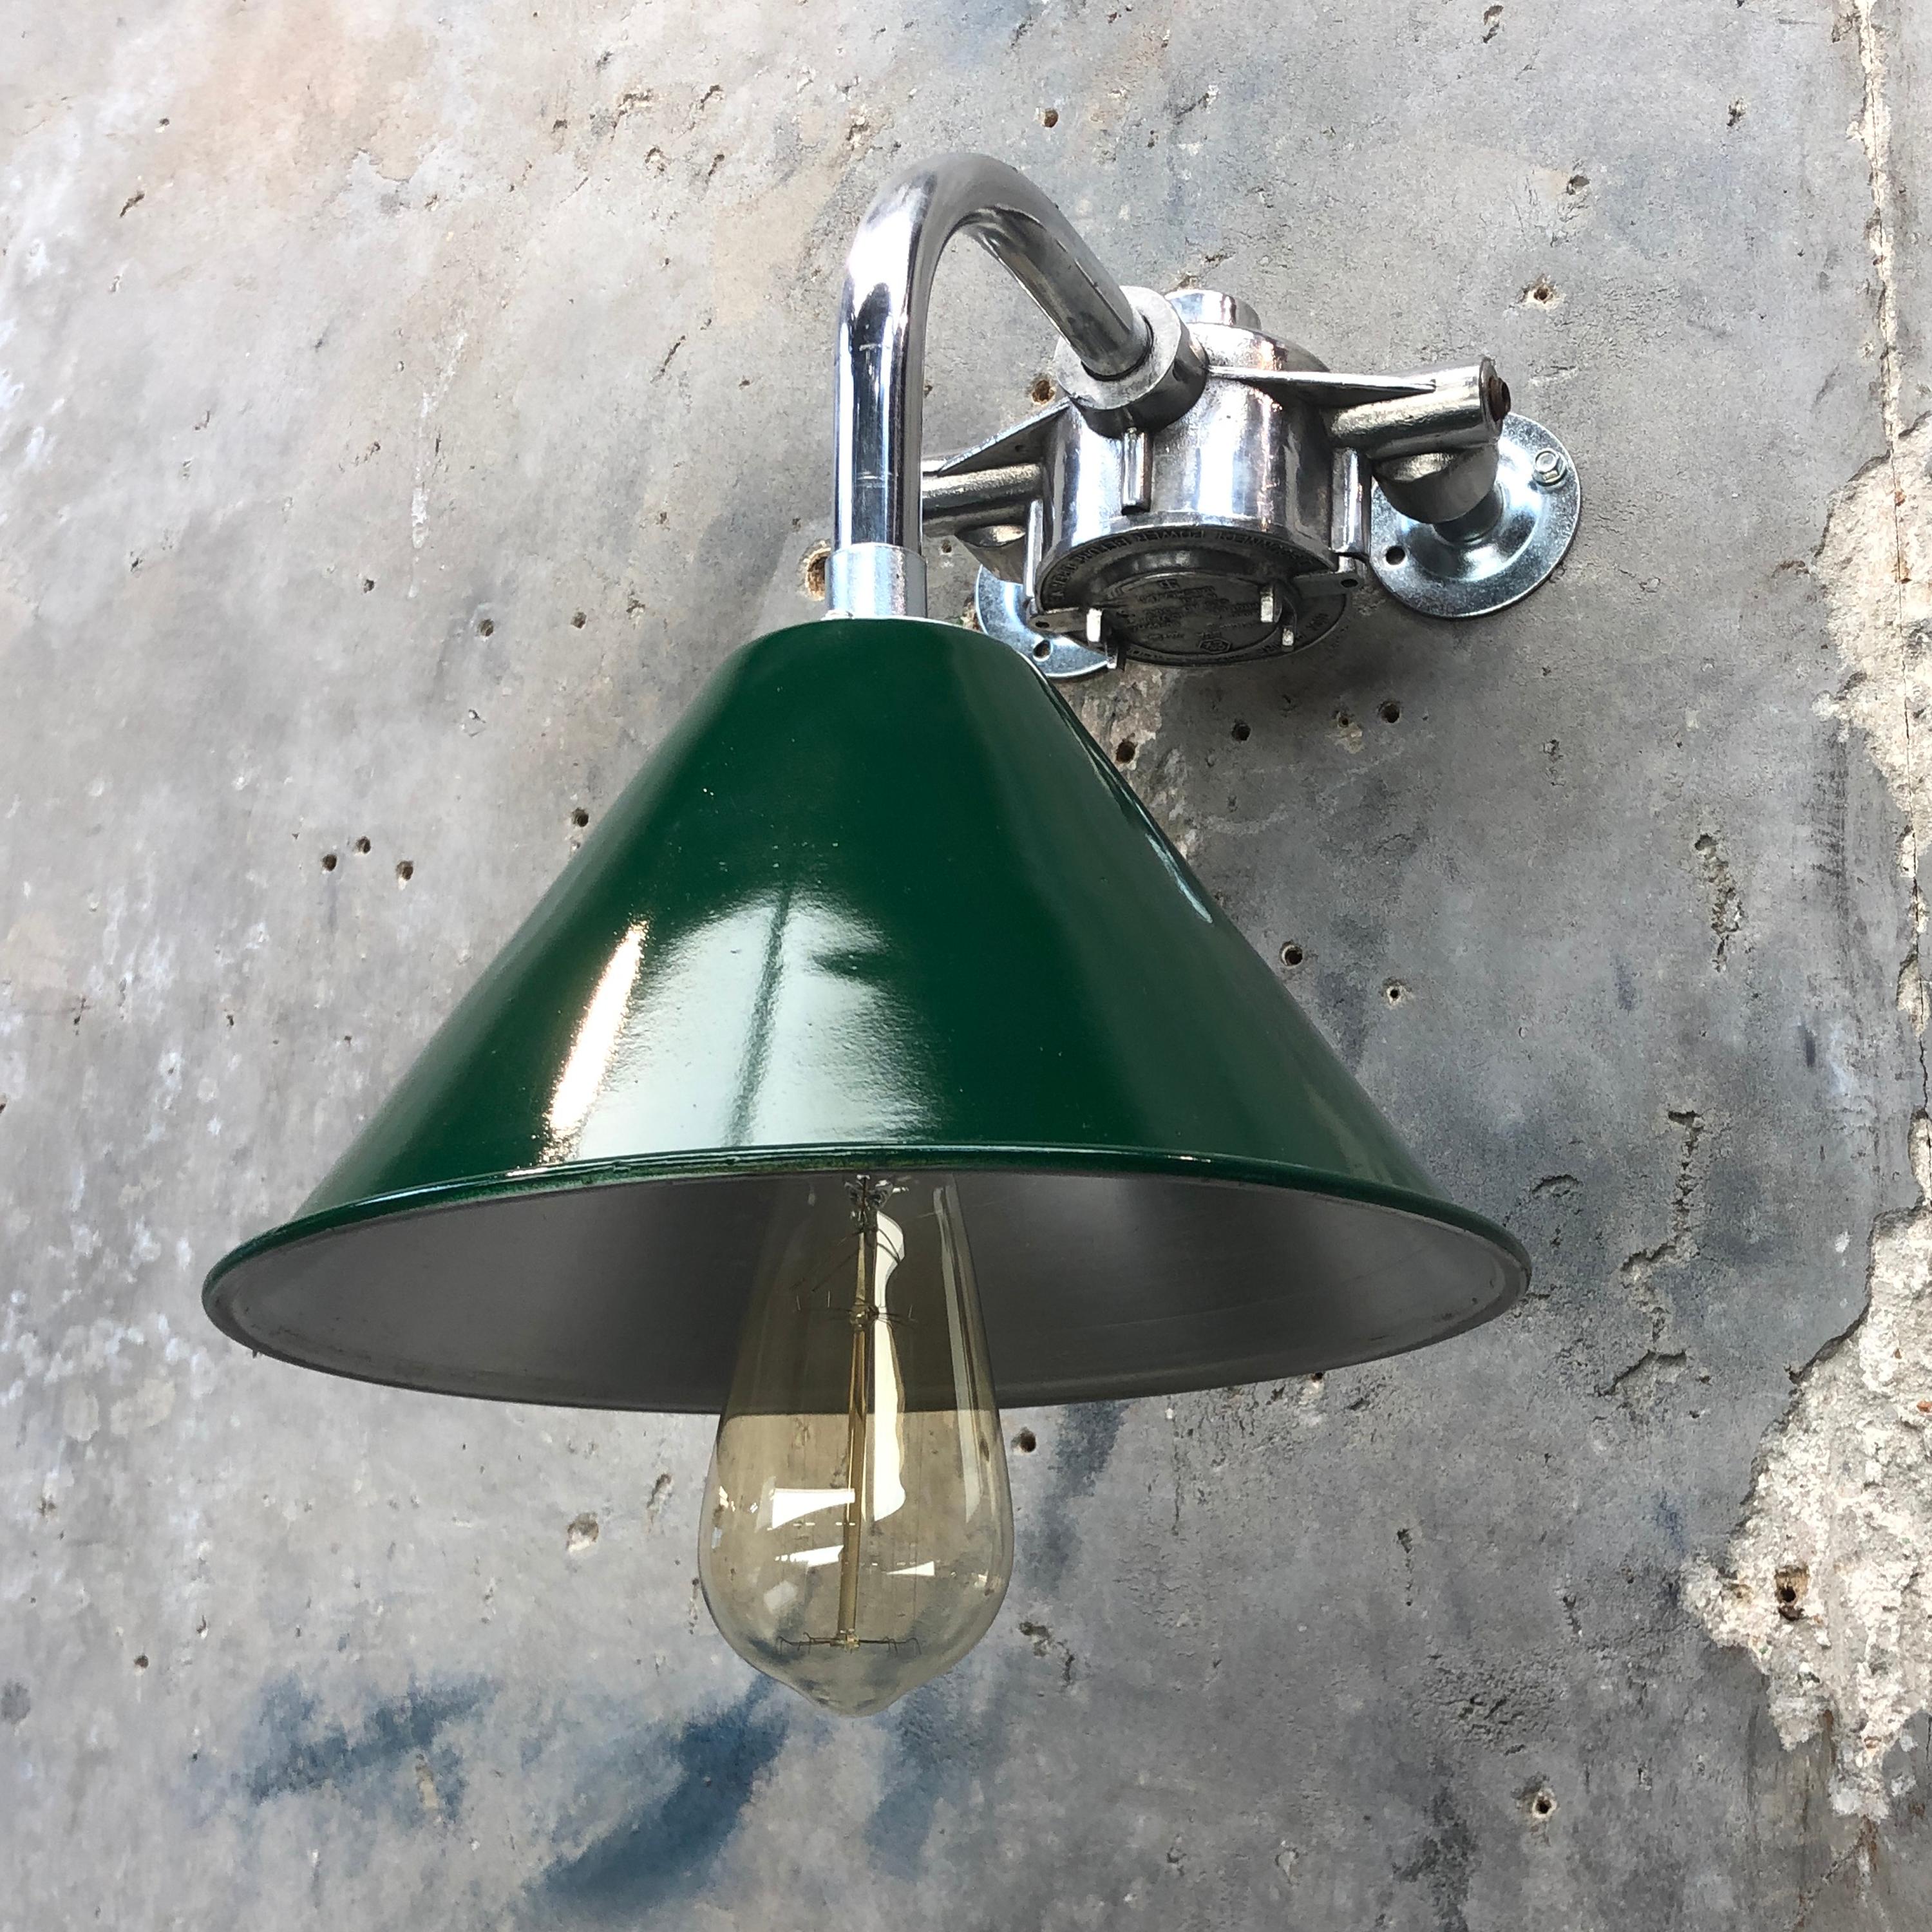 An ex British army festoon lamp shade and galvanized cantilever wall lamp with double wall fixing to allow a longer reach.

We have fabricated a galvanized cantilever and we can offer customized dimensions for the reach of the lamp from the wall,